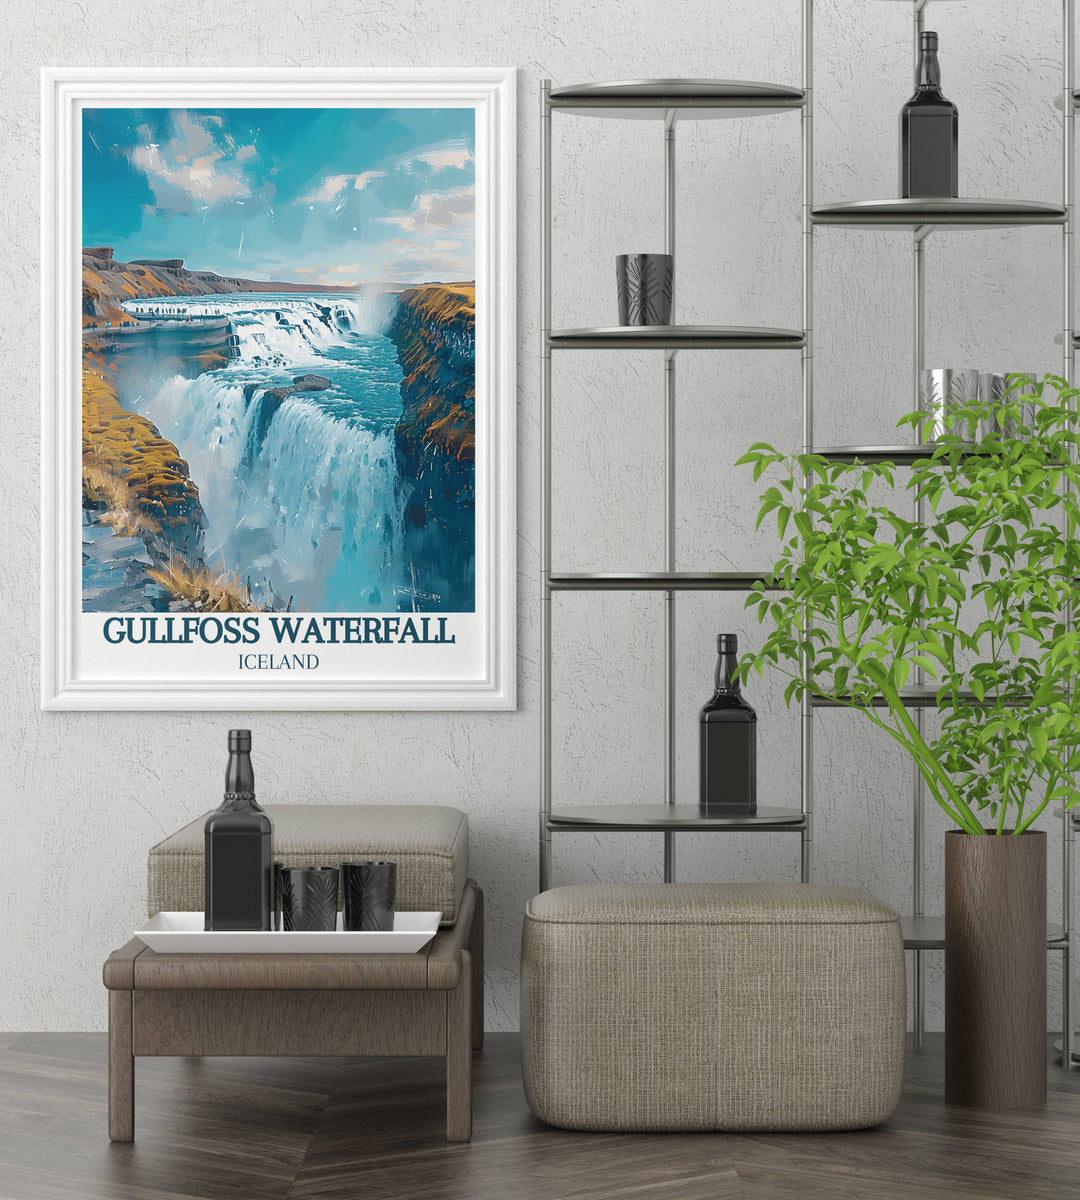 Panoramic view of Gullfoss Waterfall during autumn, with golden foliage enhancing the natural beauty in a wall art piece.